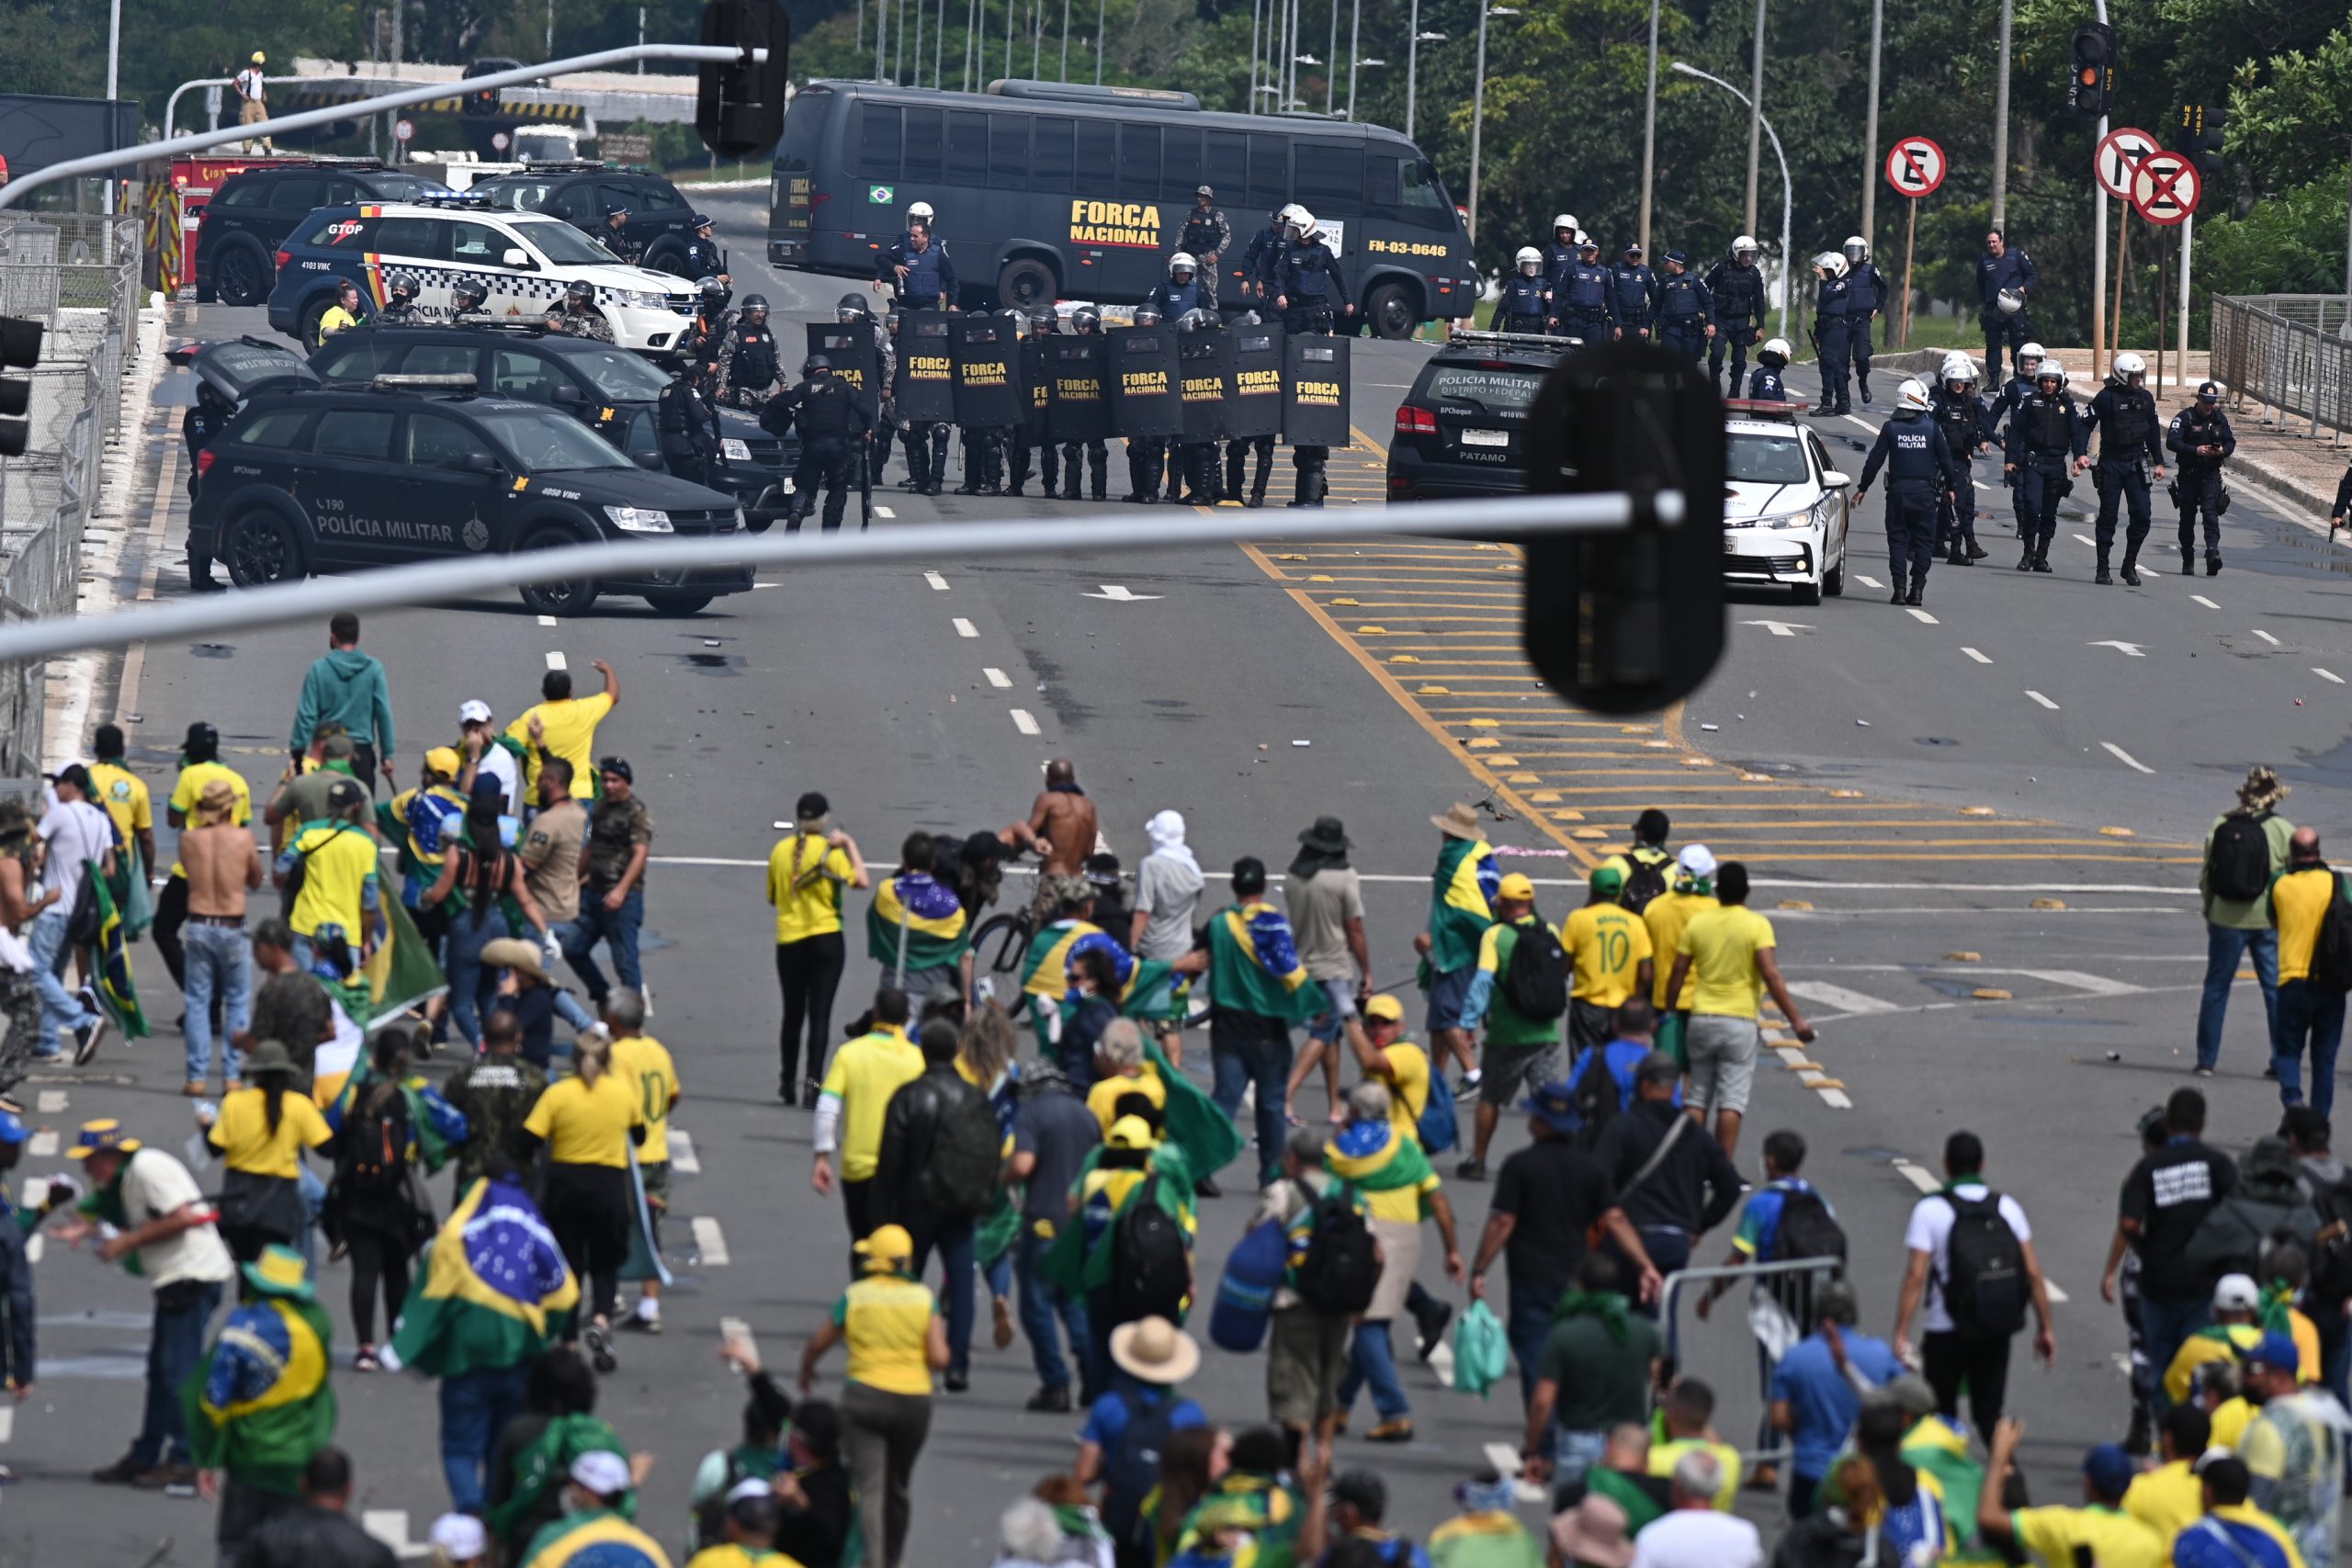 U.S. and Brazil lawmakers seek to cooperate on investigation of Brasilia riots